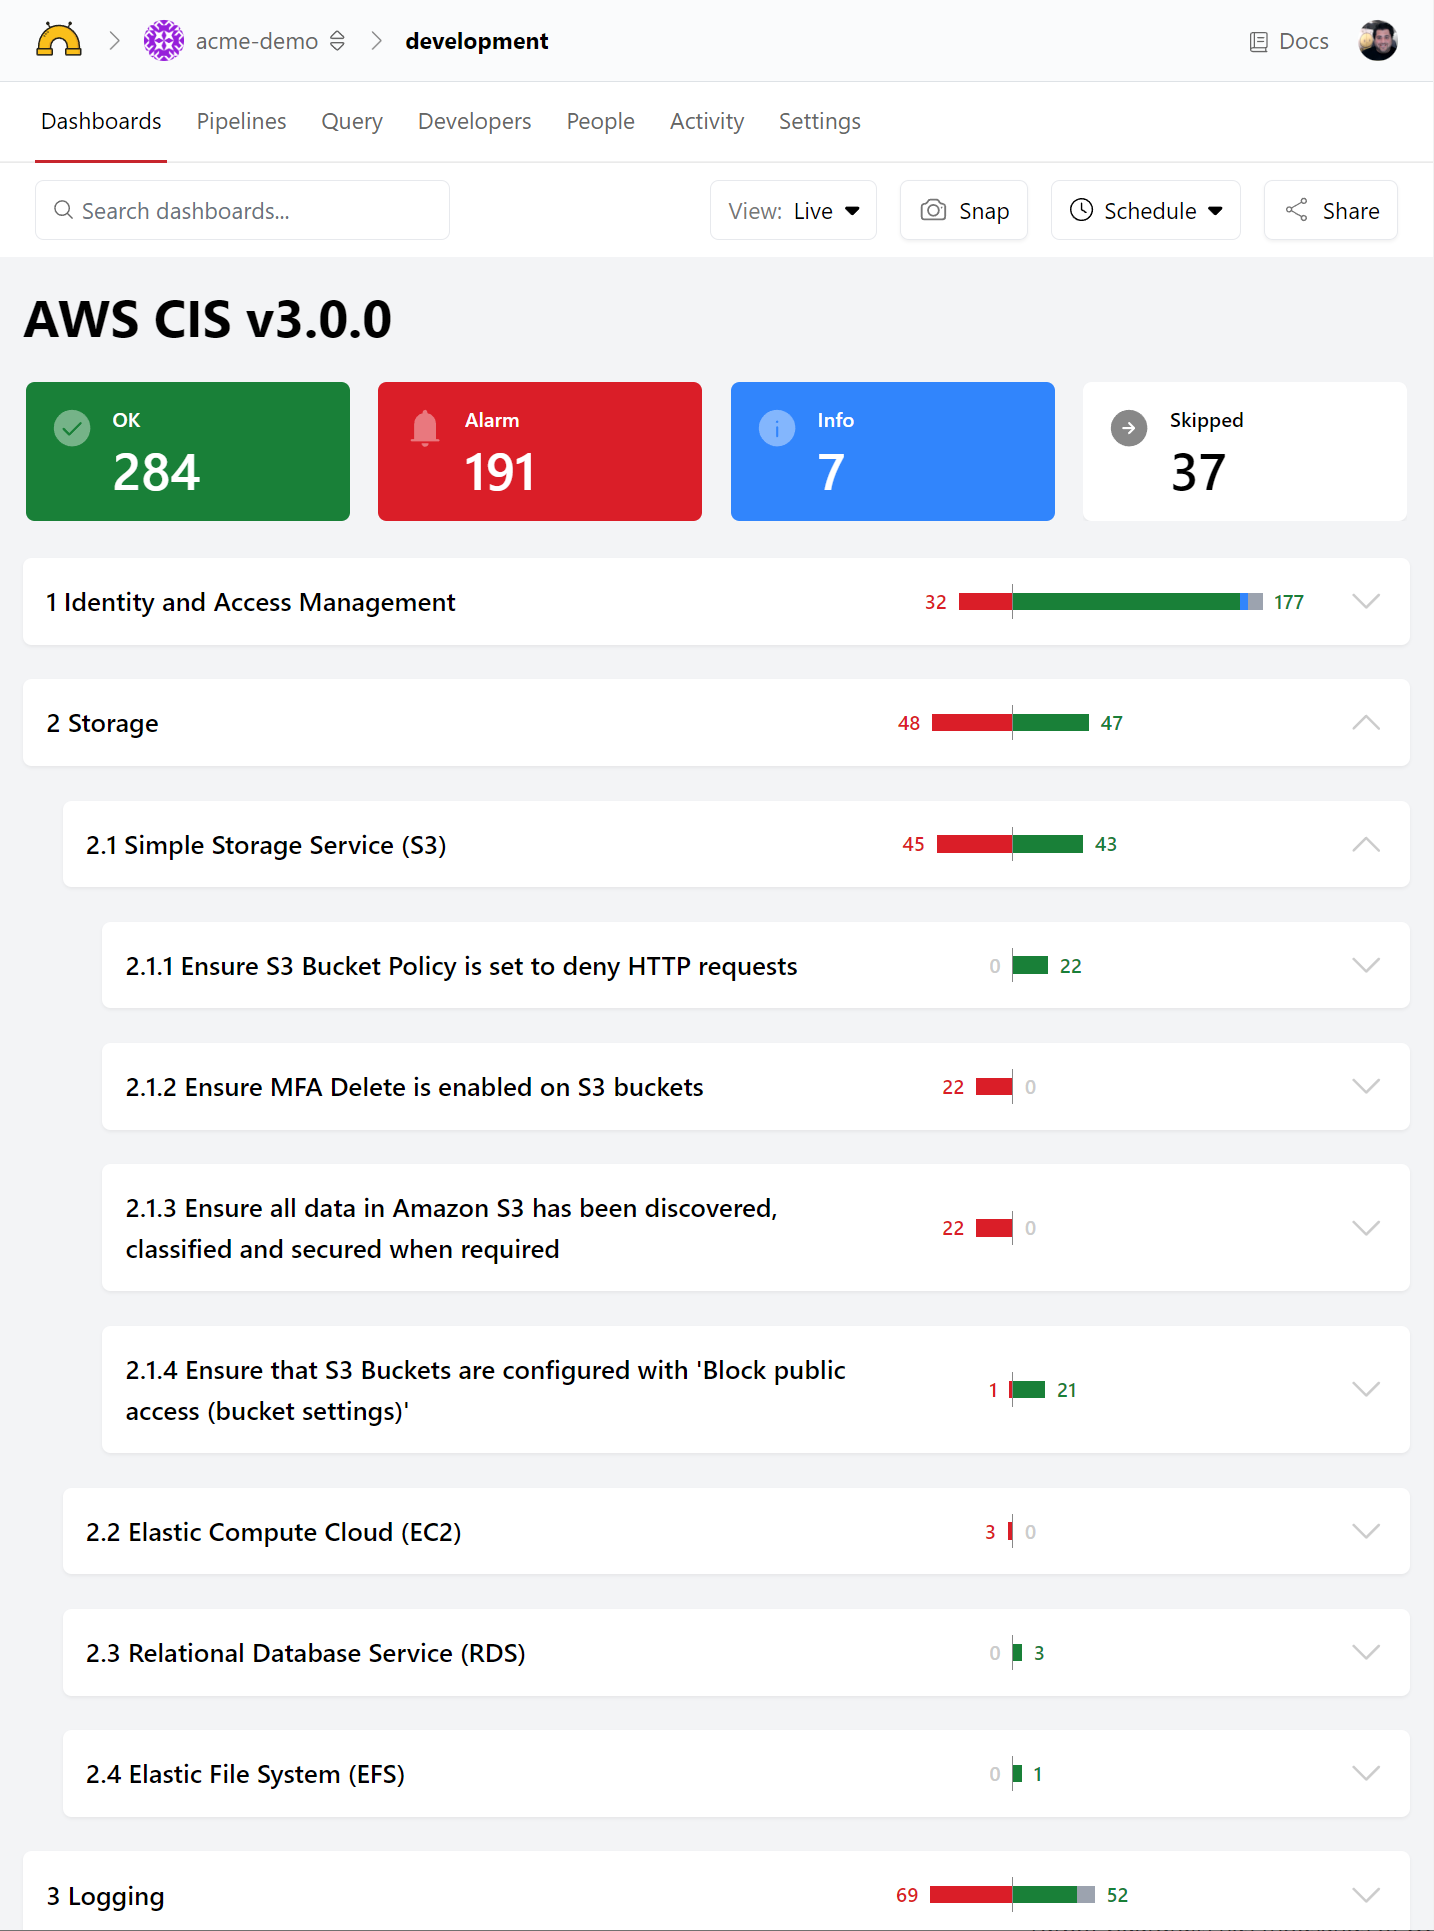 View the AWS CIS v3.0 dashboard in Turbot Pipes